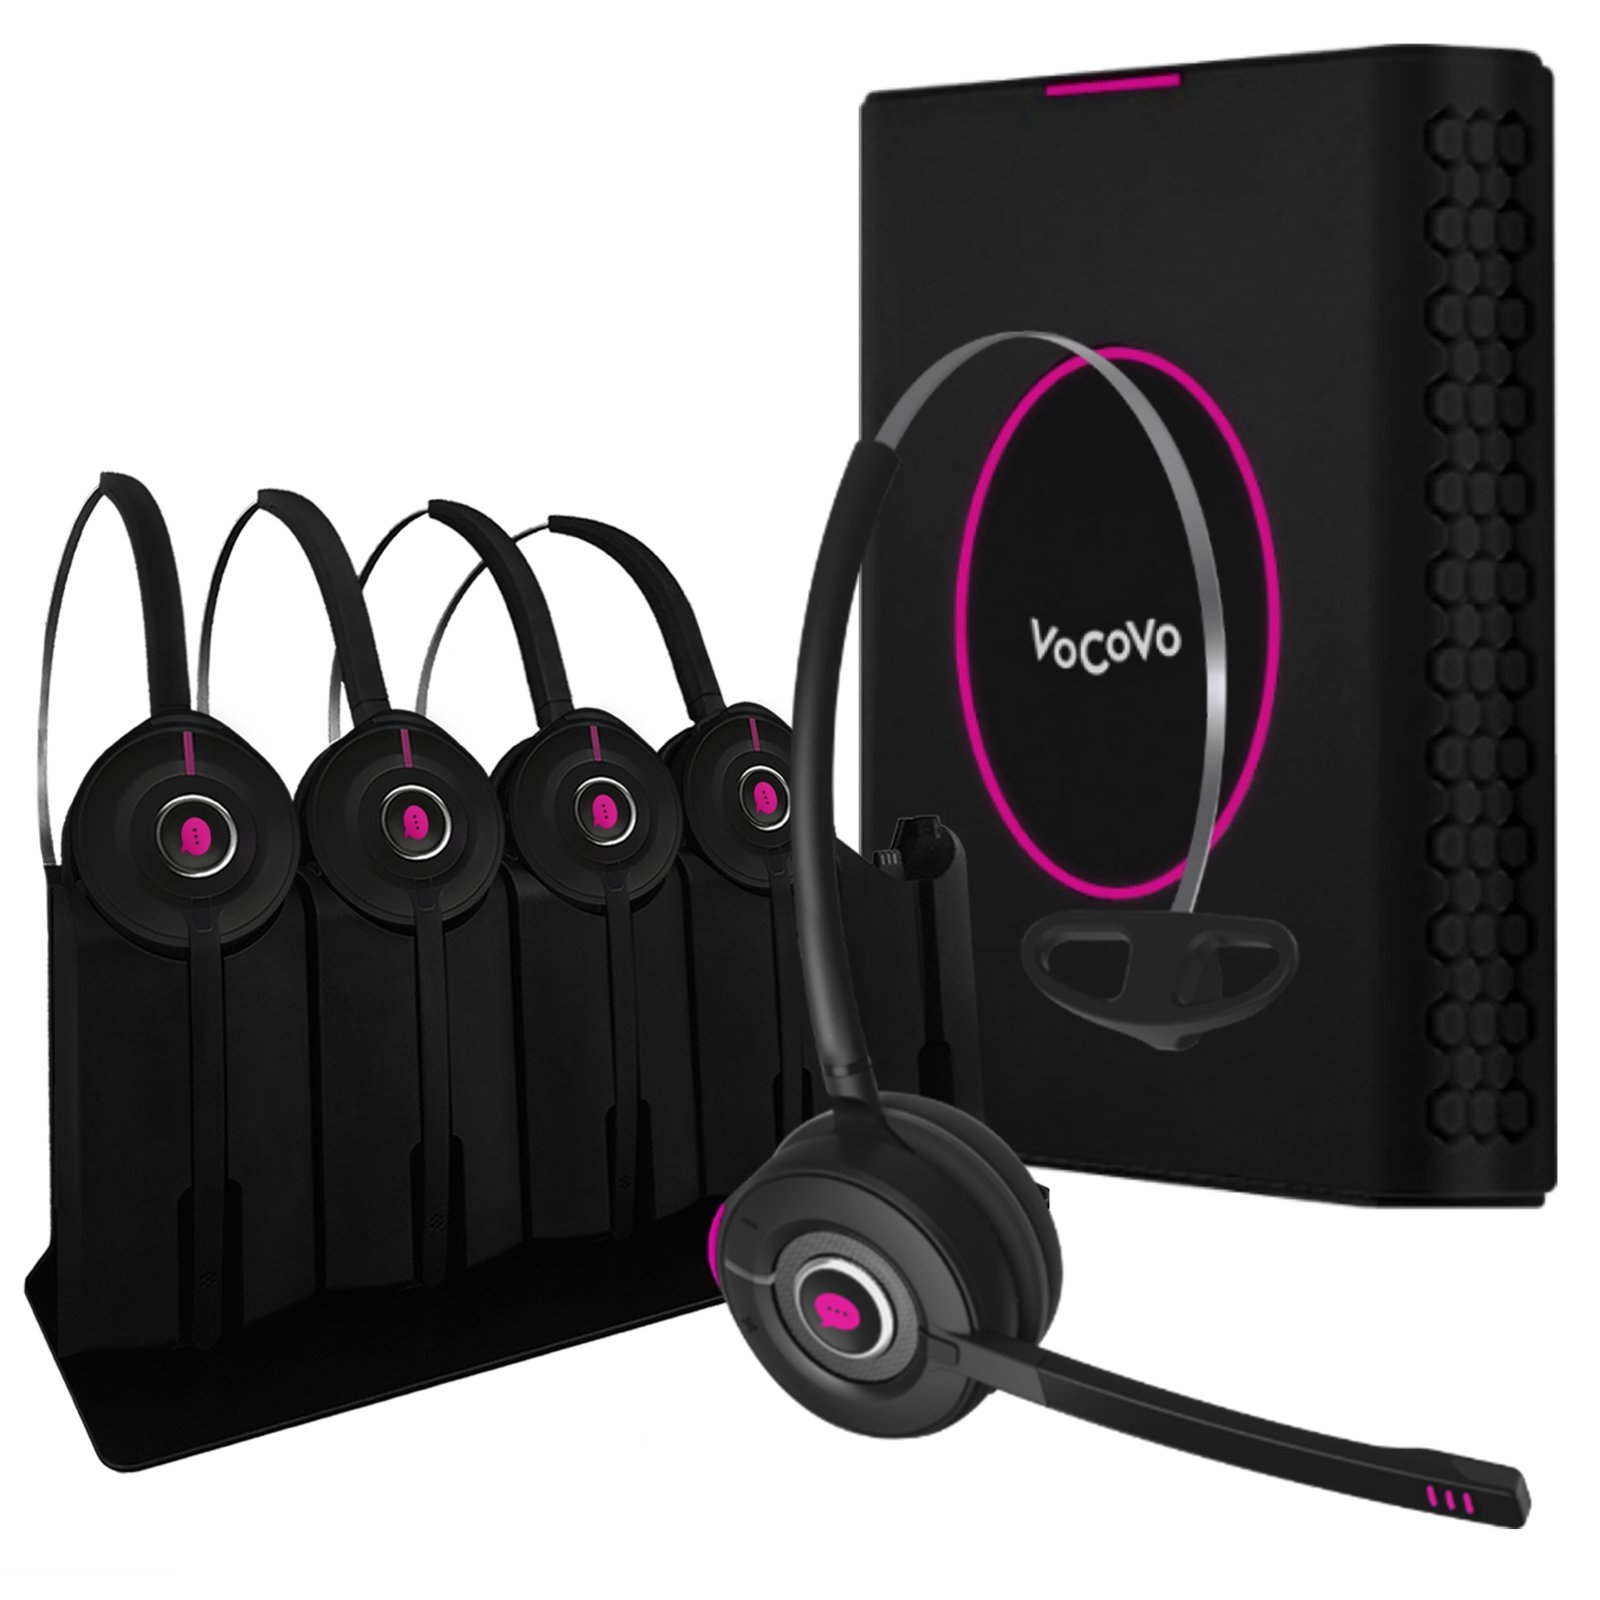 VoCoVo Go Starter Pack with 5 Headsets